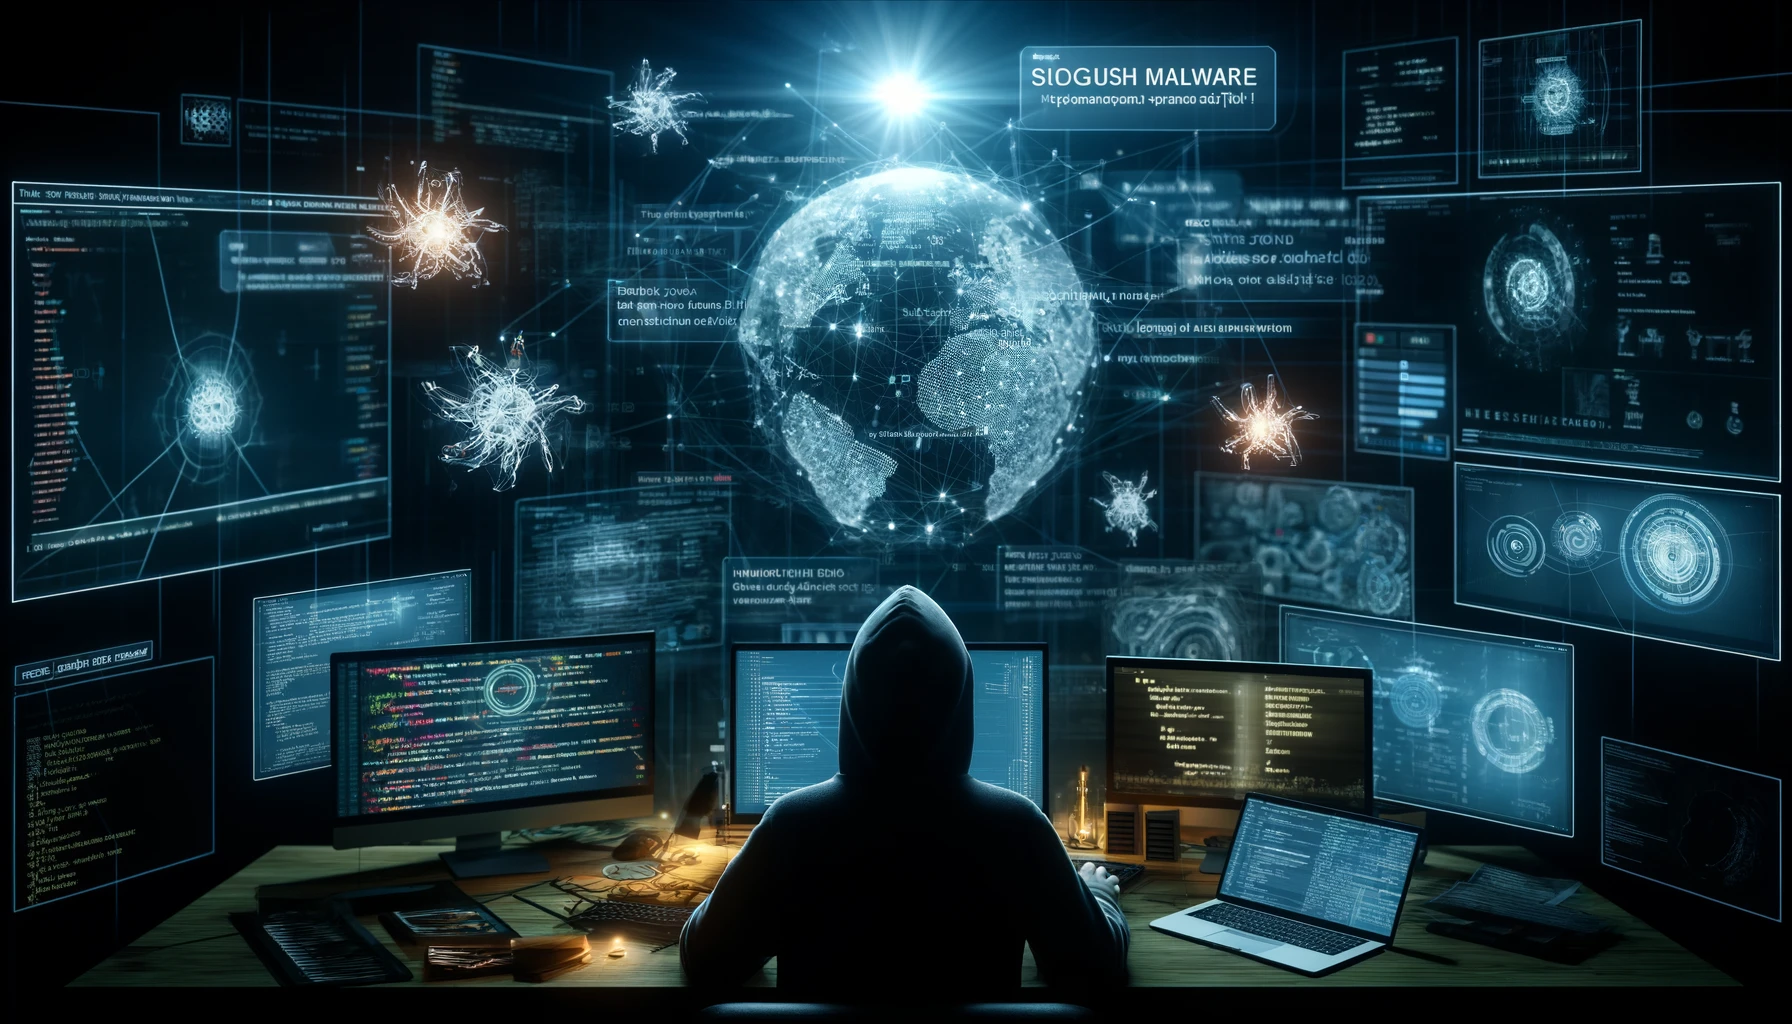 A silhouette of a cyber security analyst is surrounded by a semicircle of illuminated computer screens displaying various types of code, network diagrams, and digital maps, all related to the tracking of SocGholish malware. Digital representations of viruses and trojans float around the workspace in a dark, moody atmosphere.